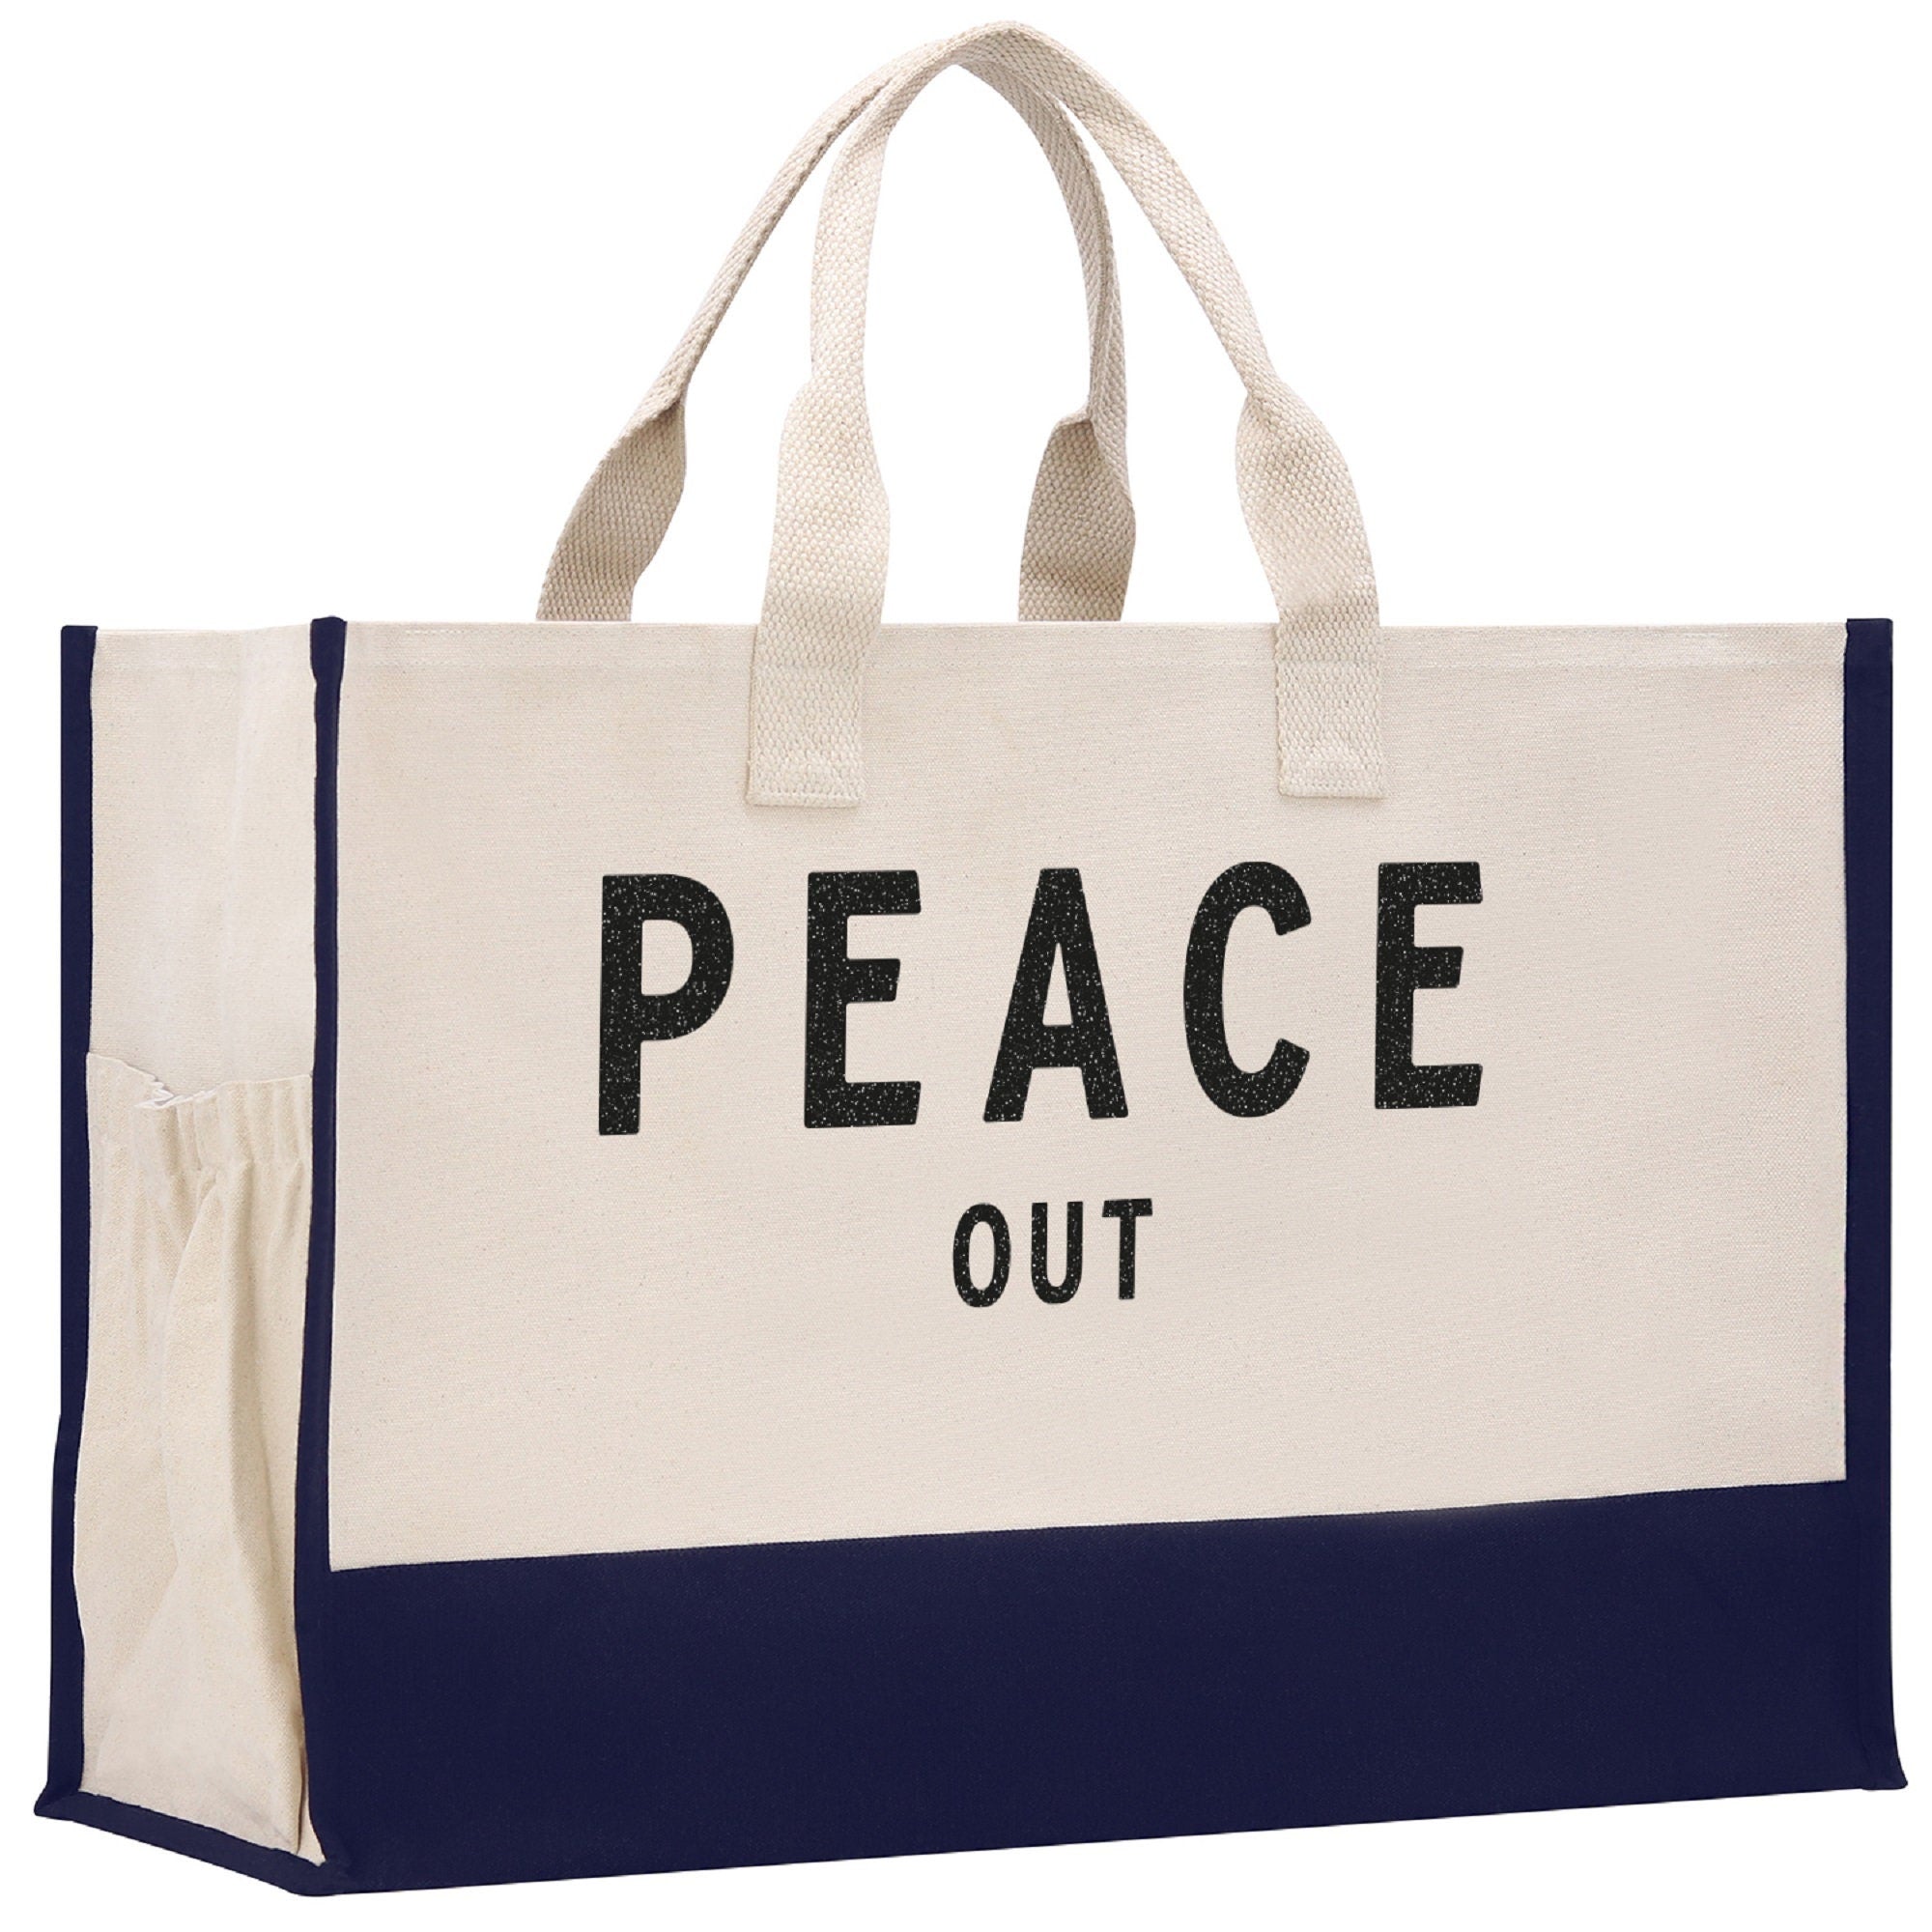 Peace Out Beach Tote Bag XL - Oversized Chic Tote Bag with Zipper and Inner Pockets - Gift for Her - Girls Weekend Tote - Weekender Bag